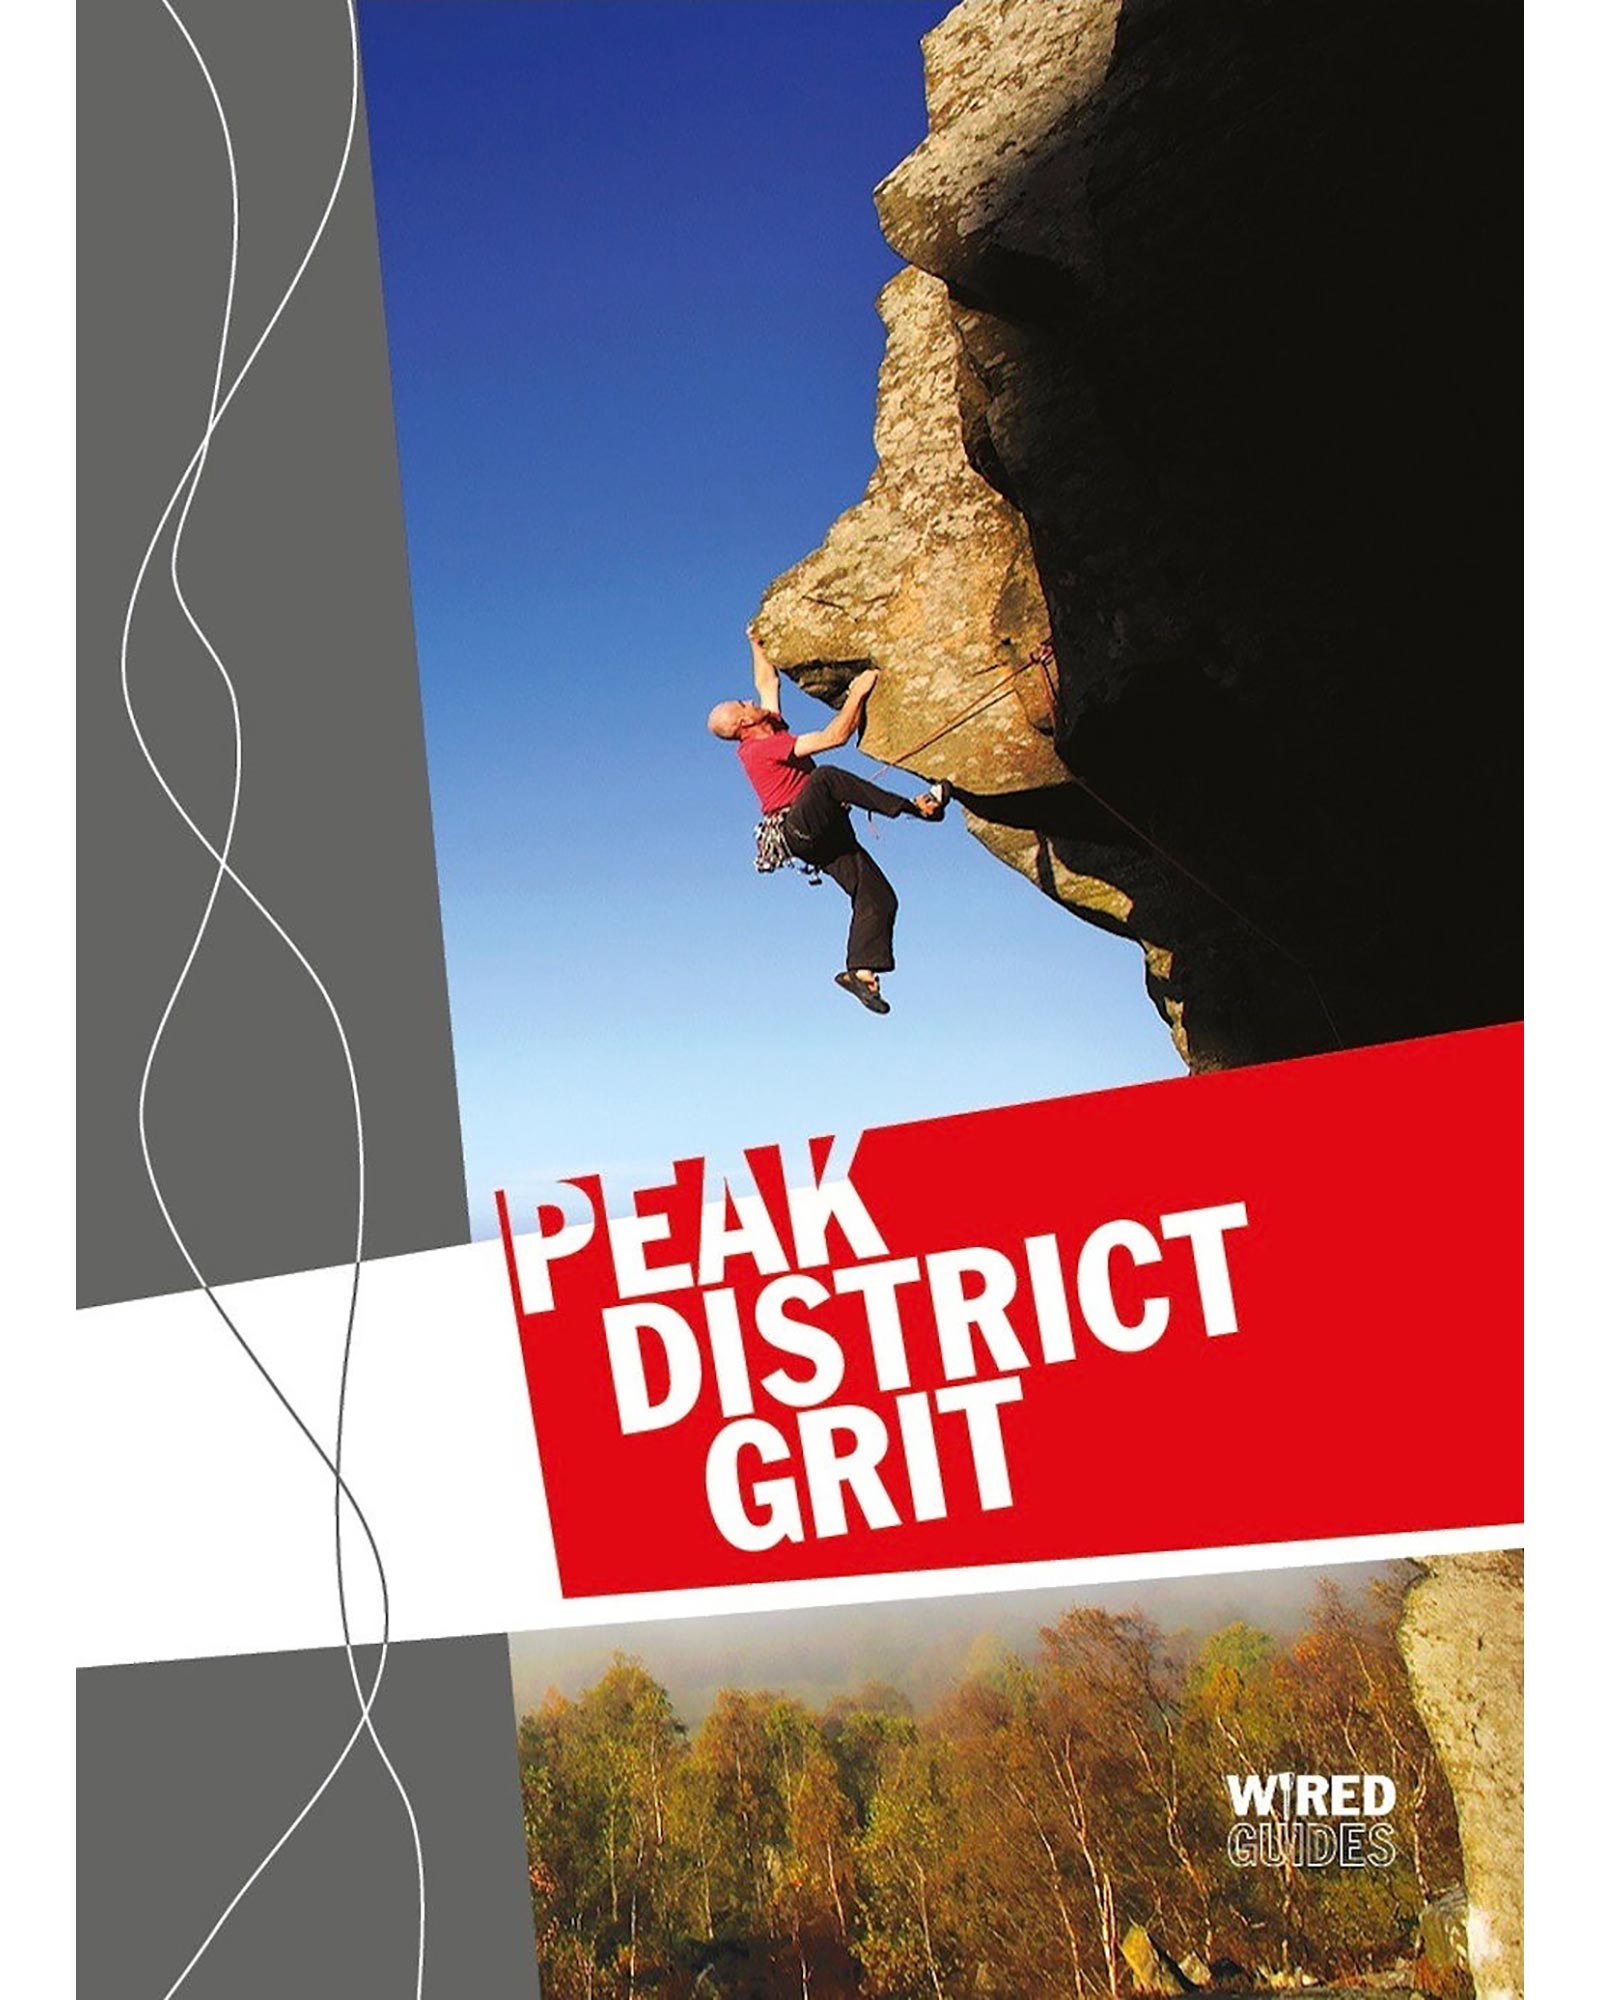 BMC / Wired Peak District Grit Guide Book